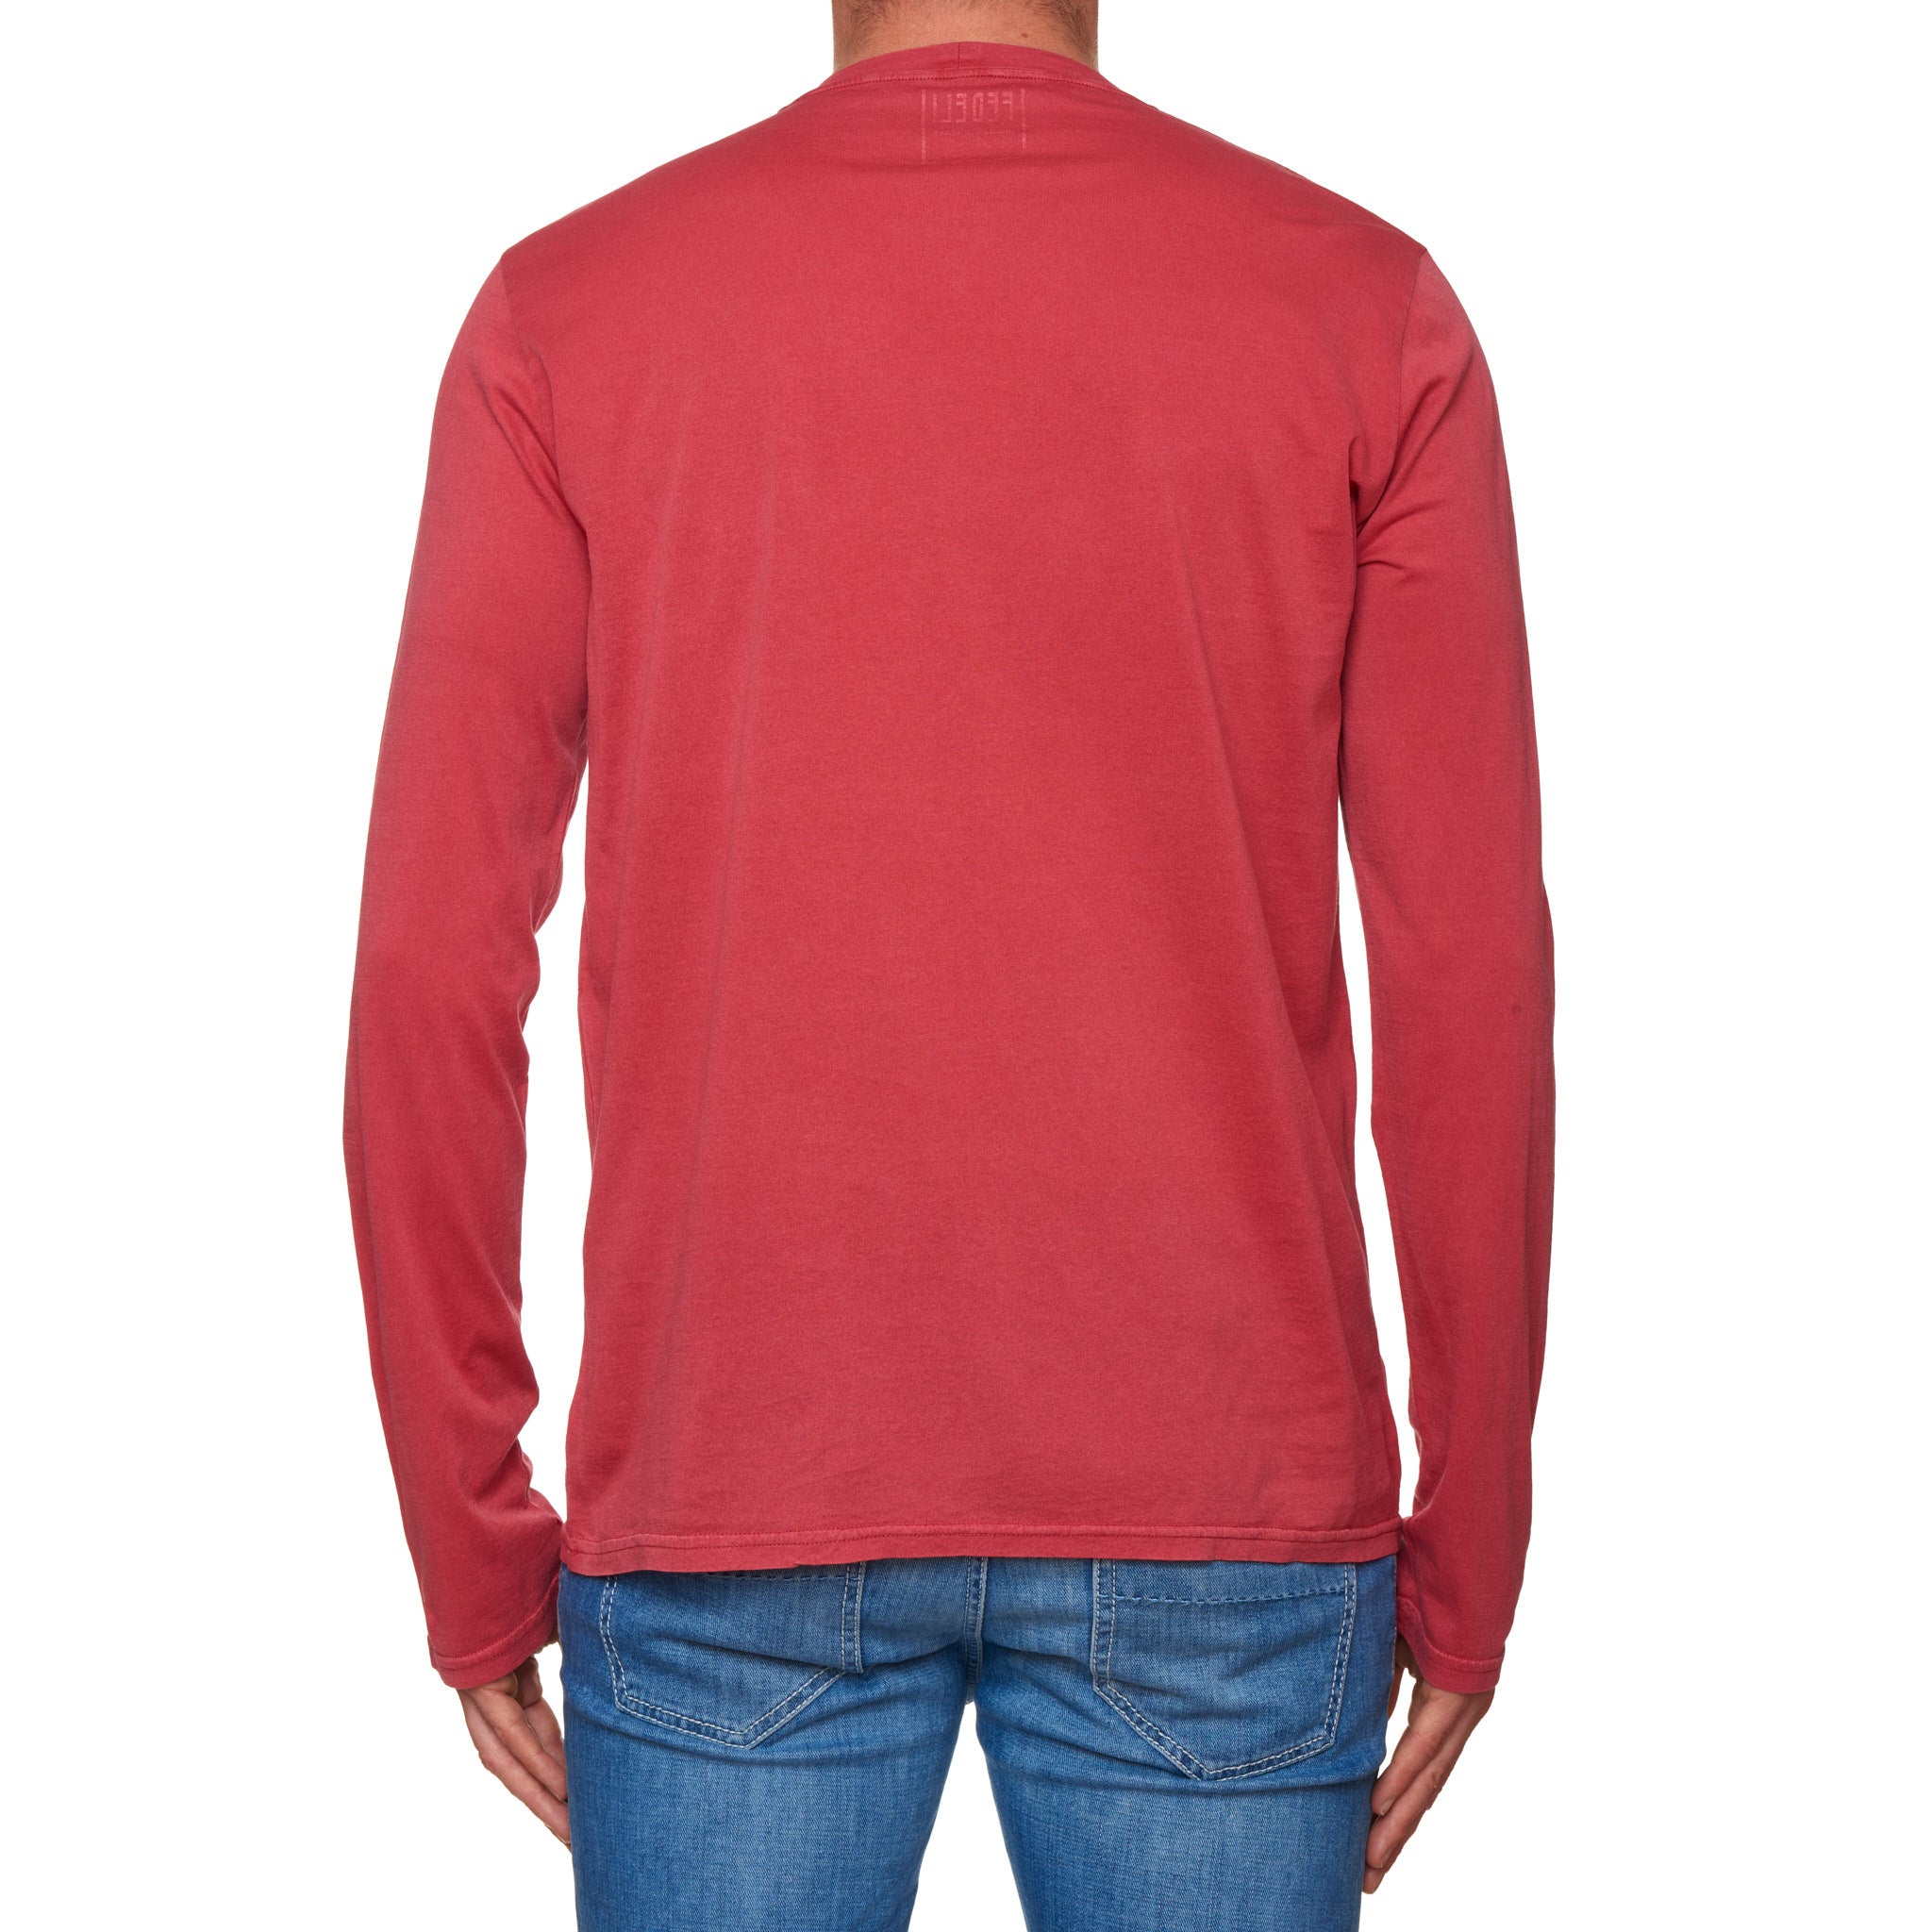 FEDELI "Gary" Coral Cotton Superlight Frosted Long Sleeve T-Shirt EU 50 NEW US M FEDELI